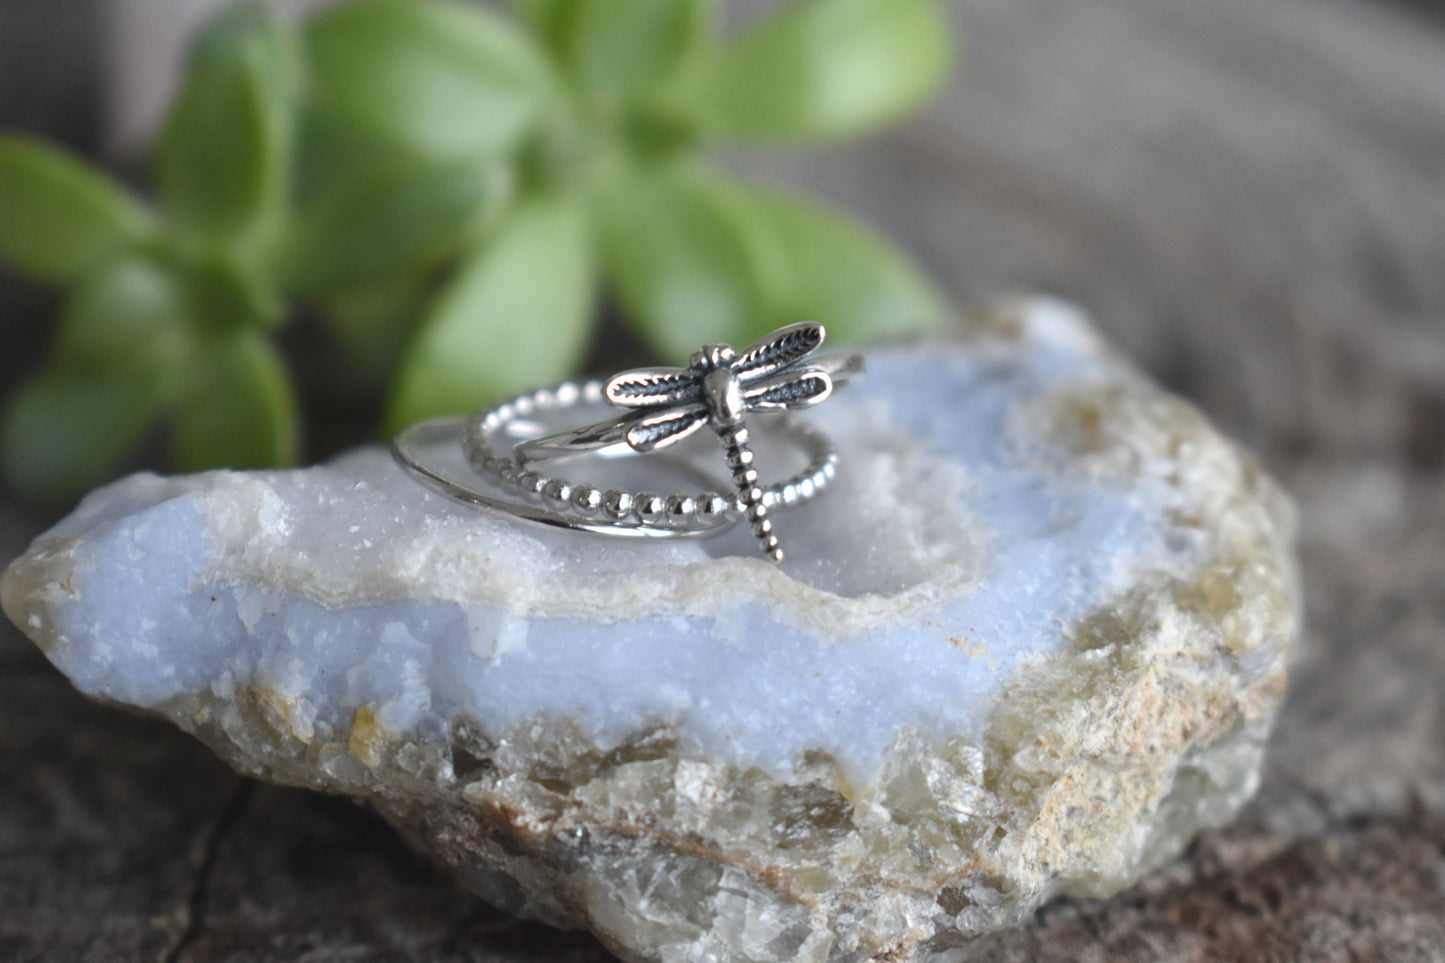 Dragonfly Ring- Sterling Silver Dragonfly Ring, Dragonfly Jewelry